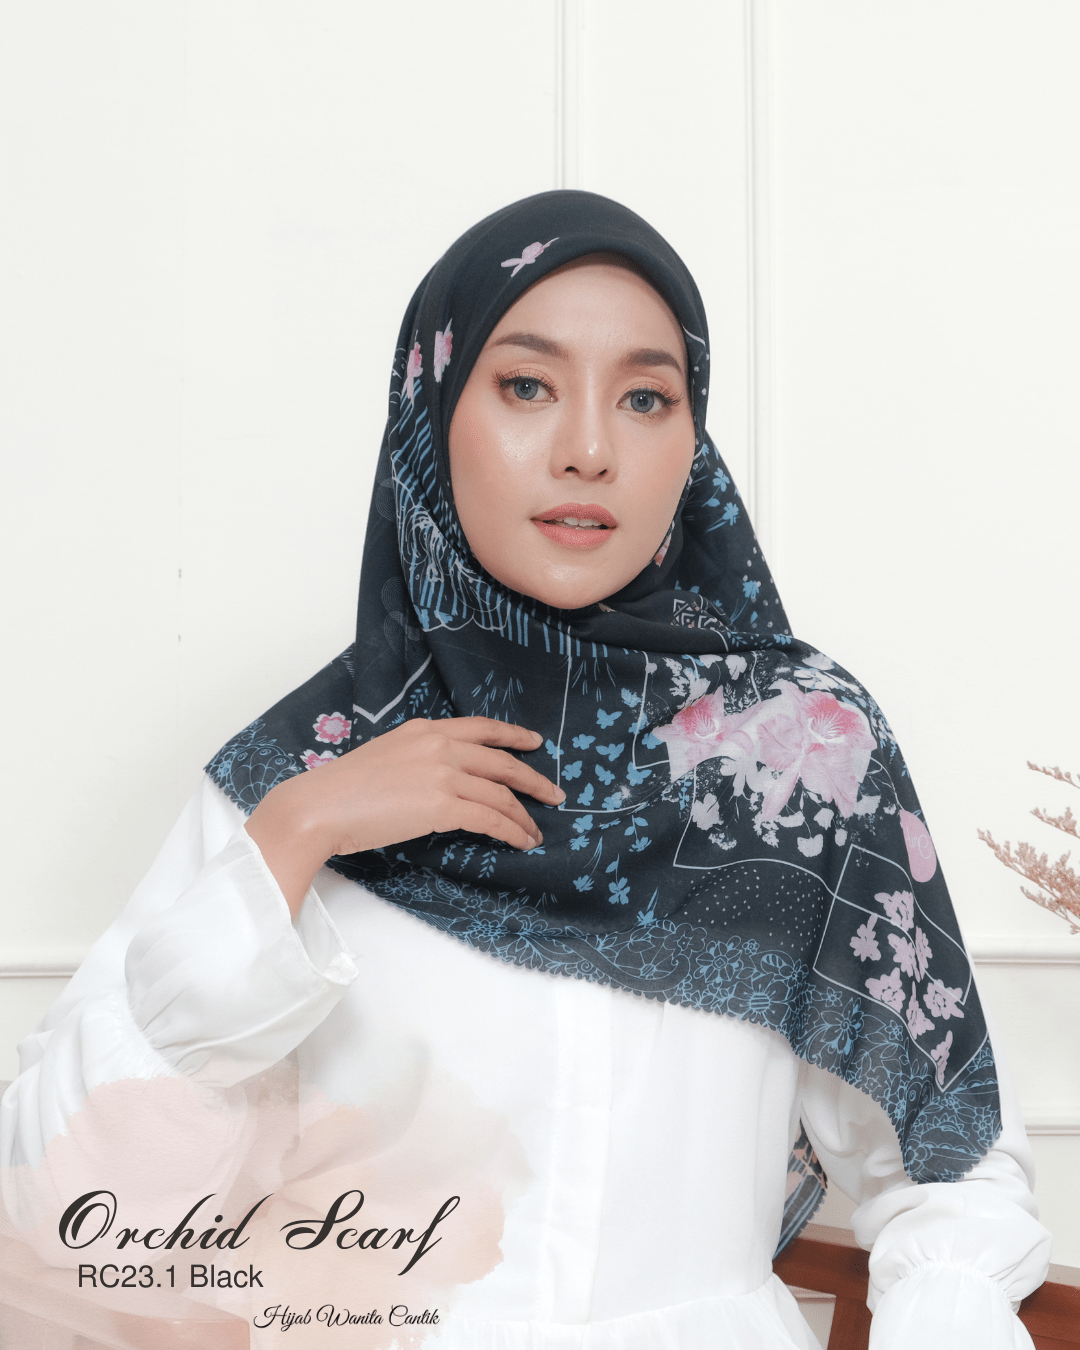 Orchid Scarf - RC23.1 Black